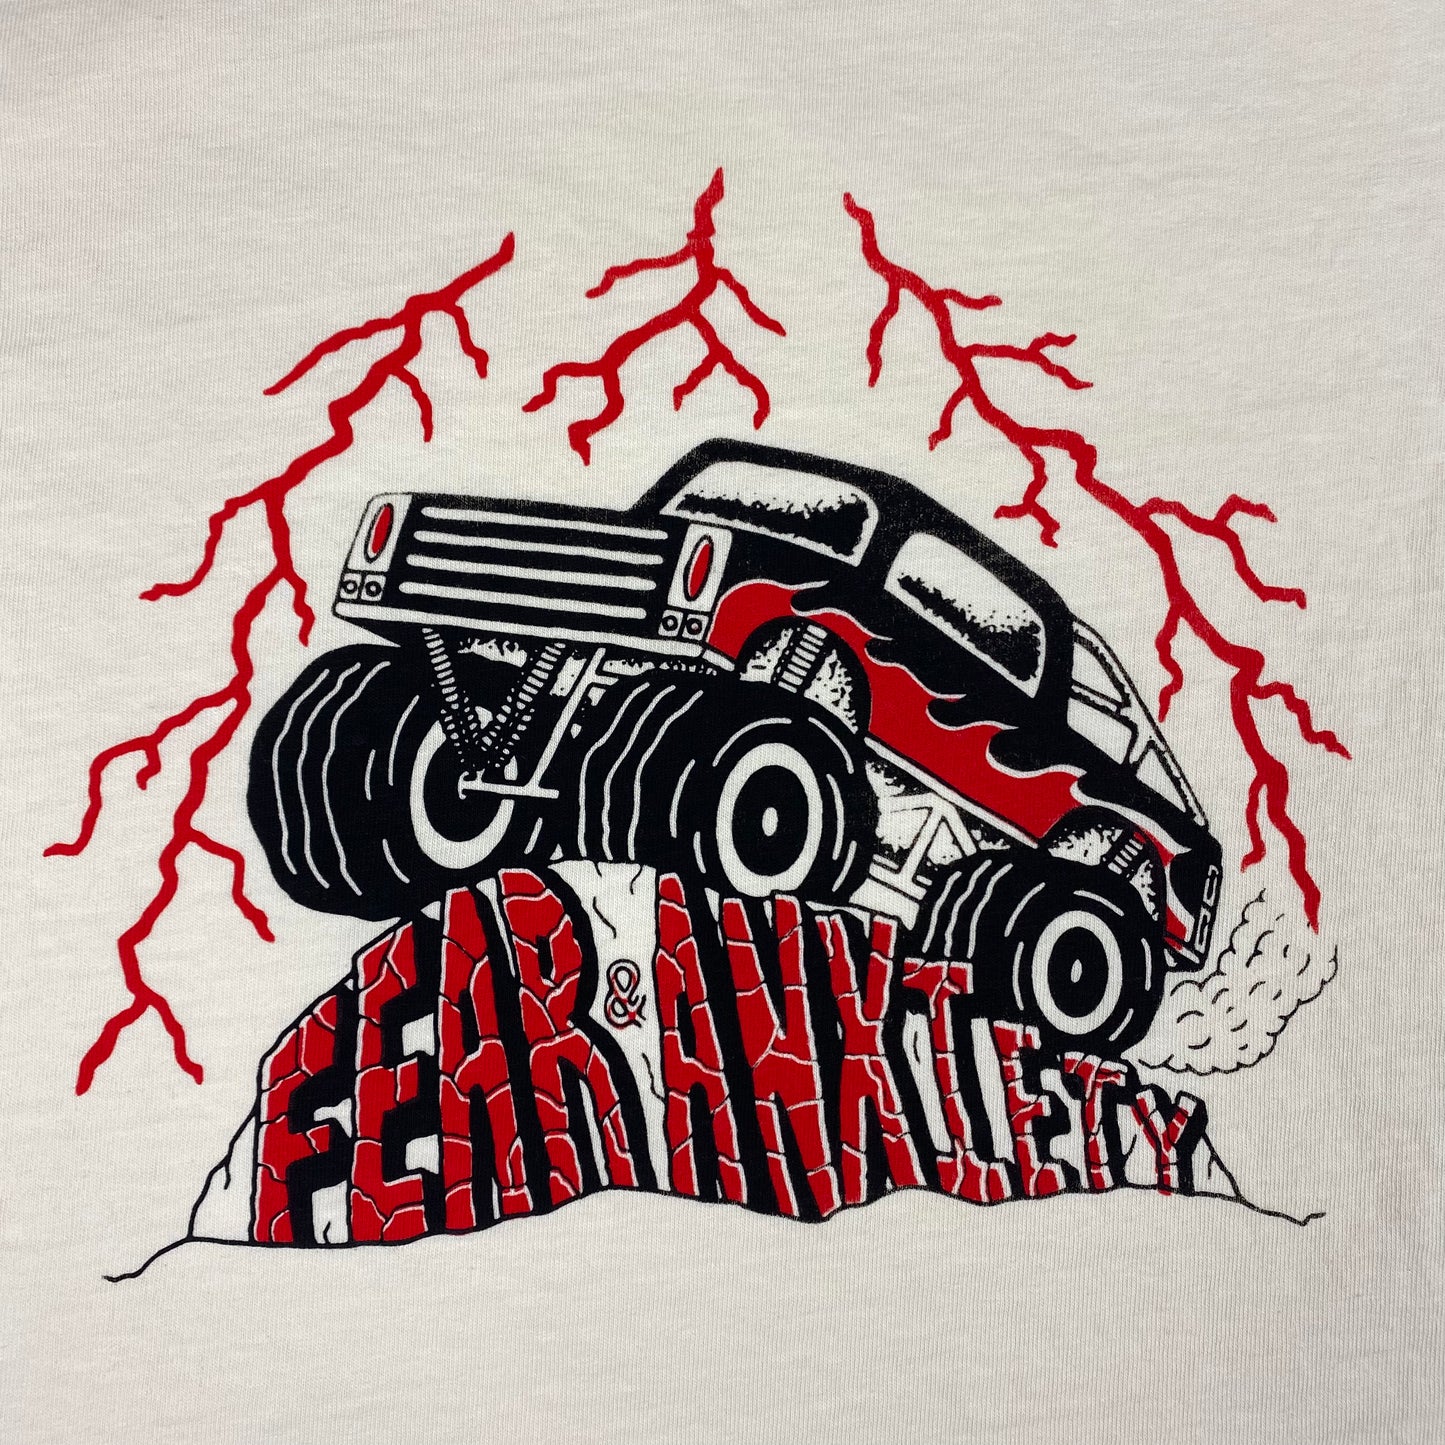 "Fear & Anxiety Monster Truck" Tee